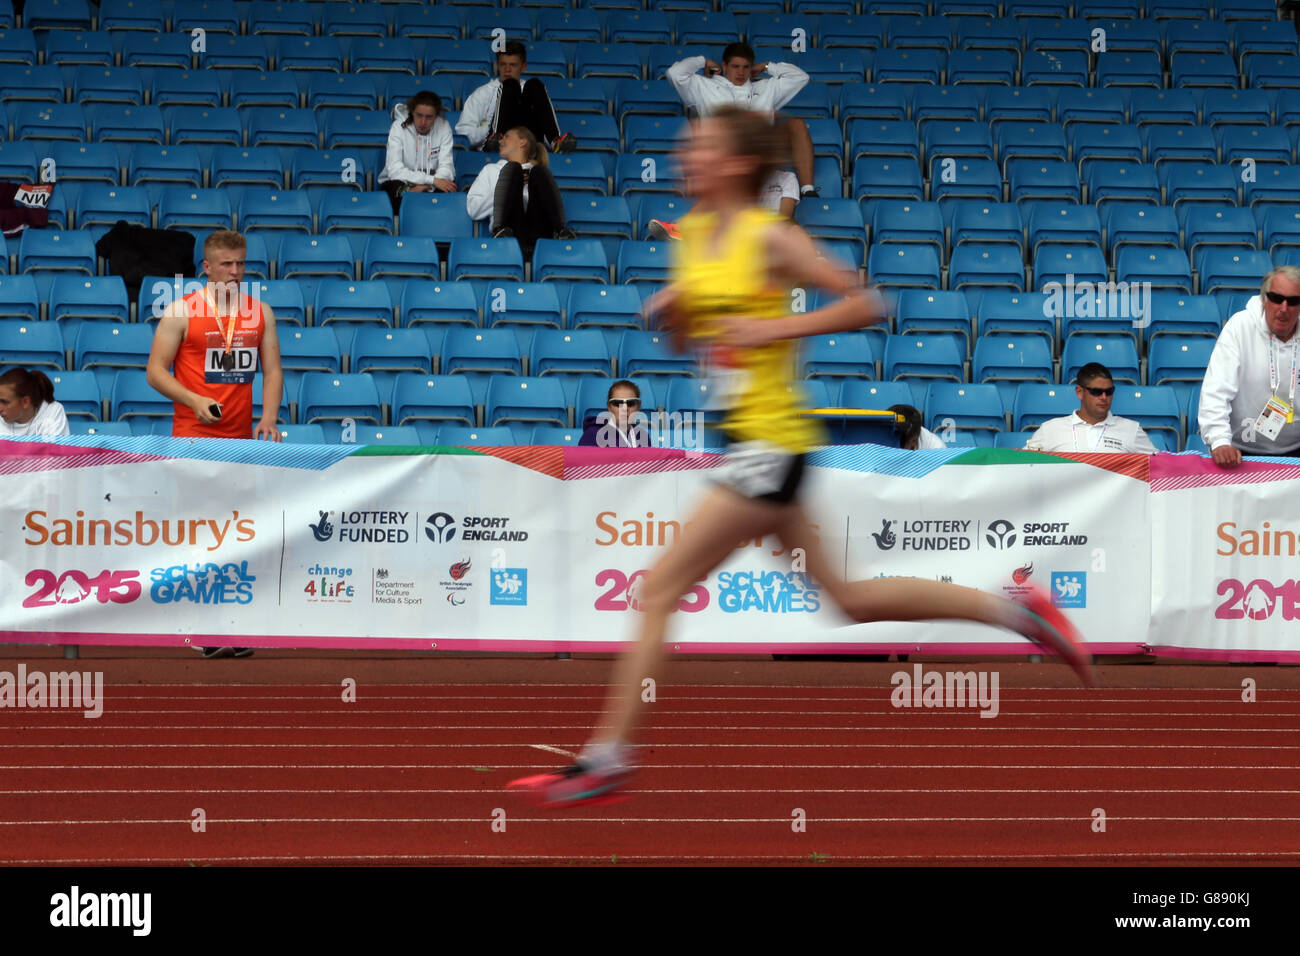 Sport - Sainsbury's 2015 School Games - Day Two - Manchester. The girls 3000m runners make their way past the cheering crowd at the Sainsbury's 2015 School Games at the Manchester Regional Arena. Stock Photo